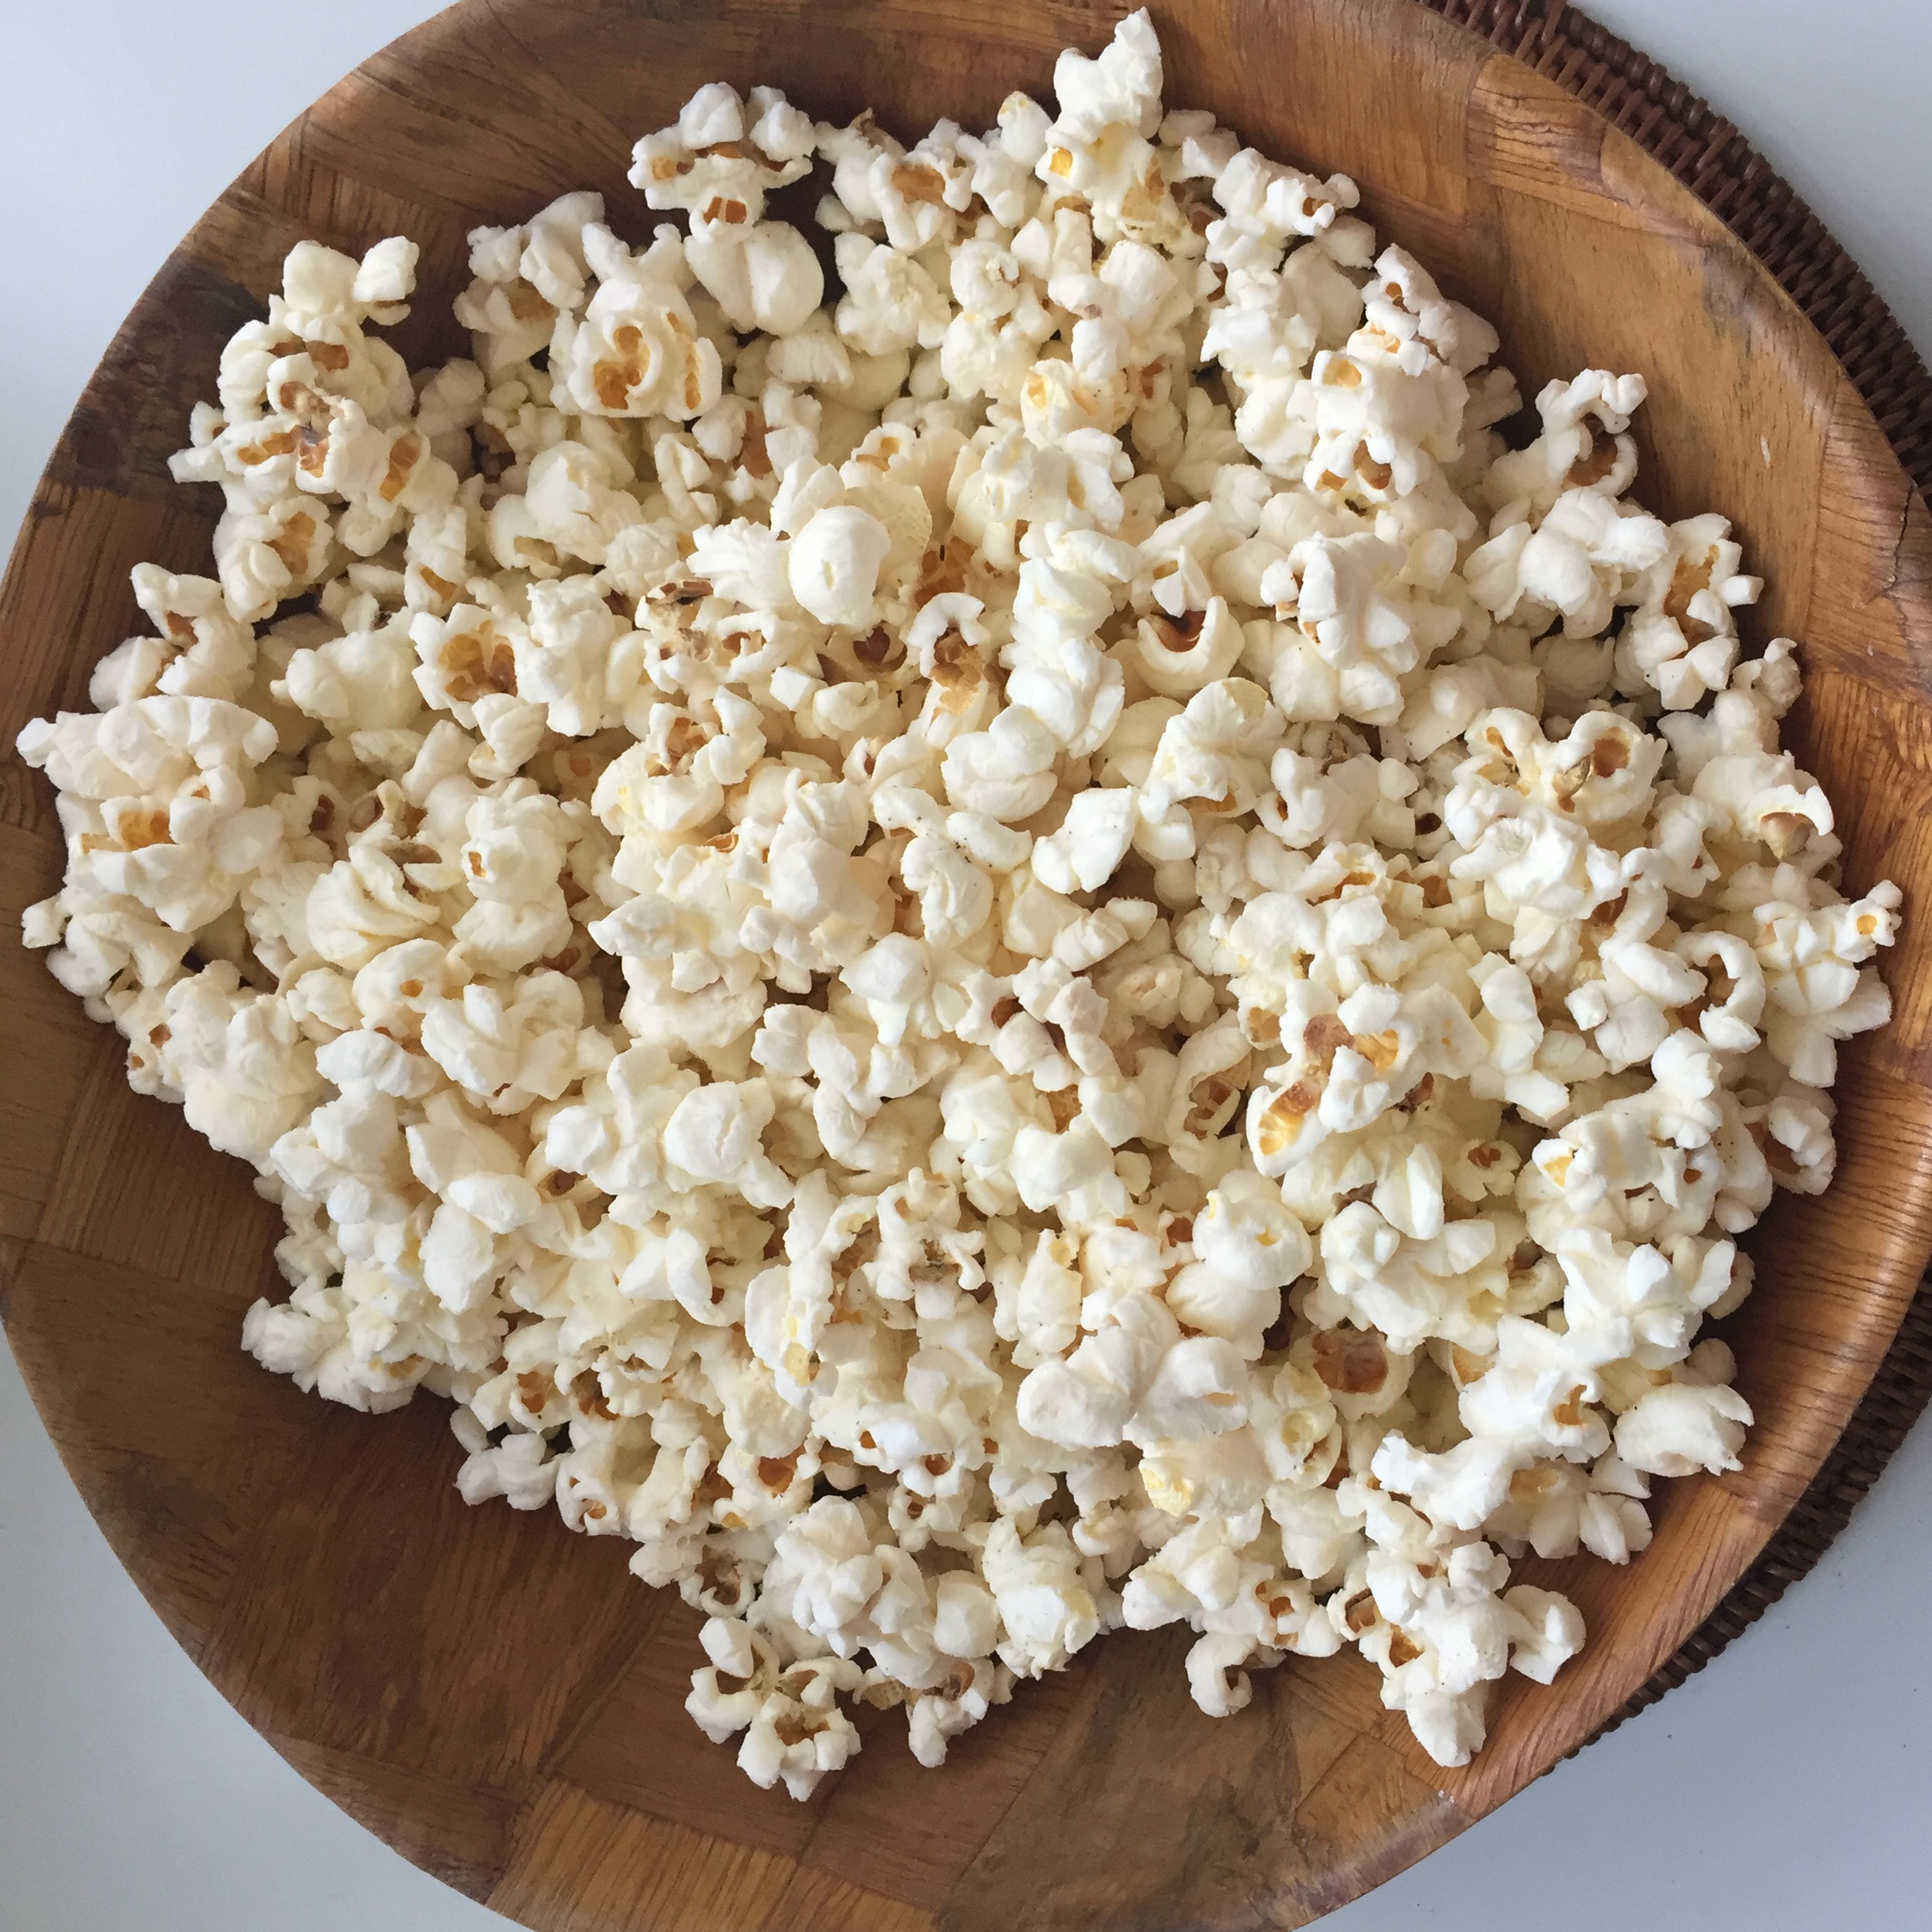 Place popcorn in a bowl, and season to taste. Enjoy!